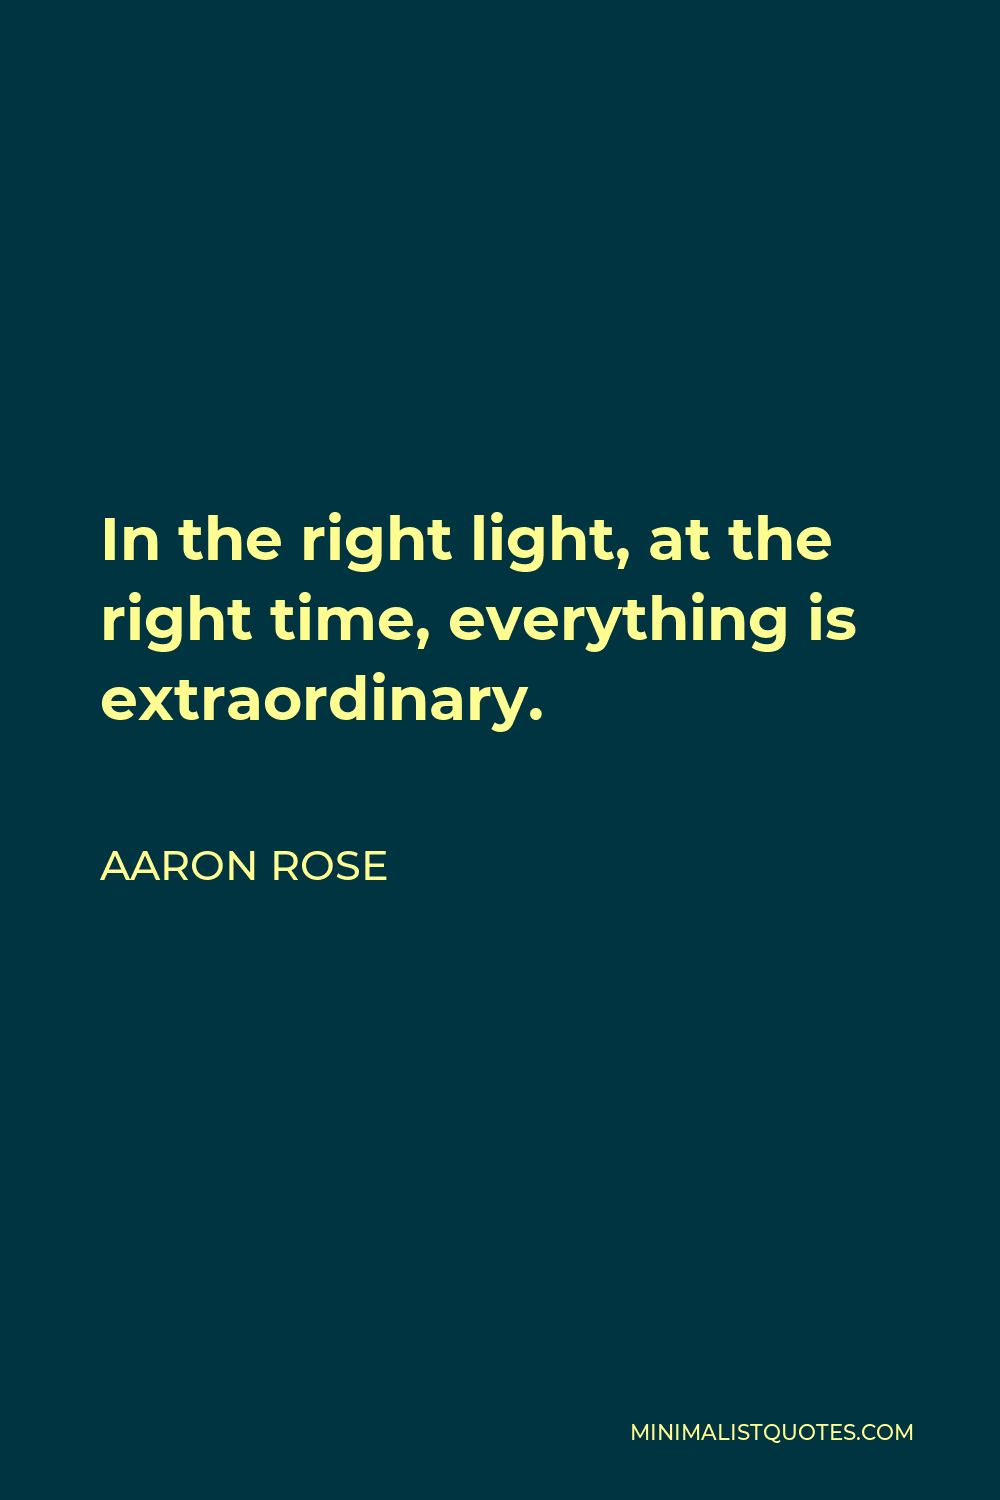 Aaron Rose Quote - In the right light, at the right time, everything is extraordinary.